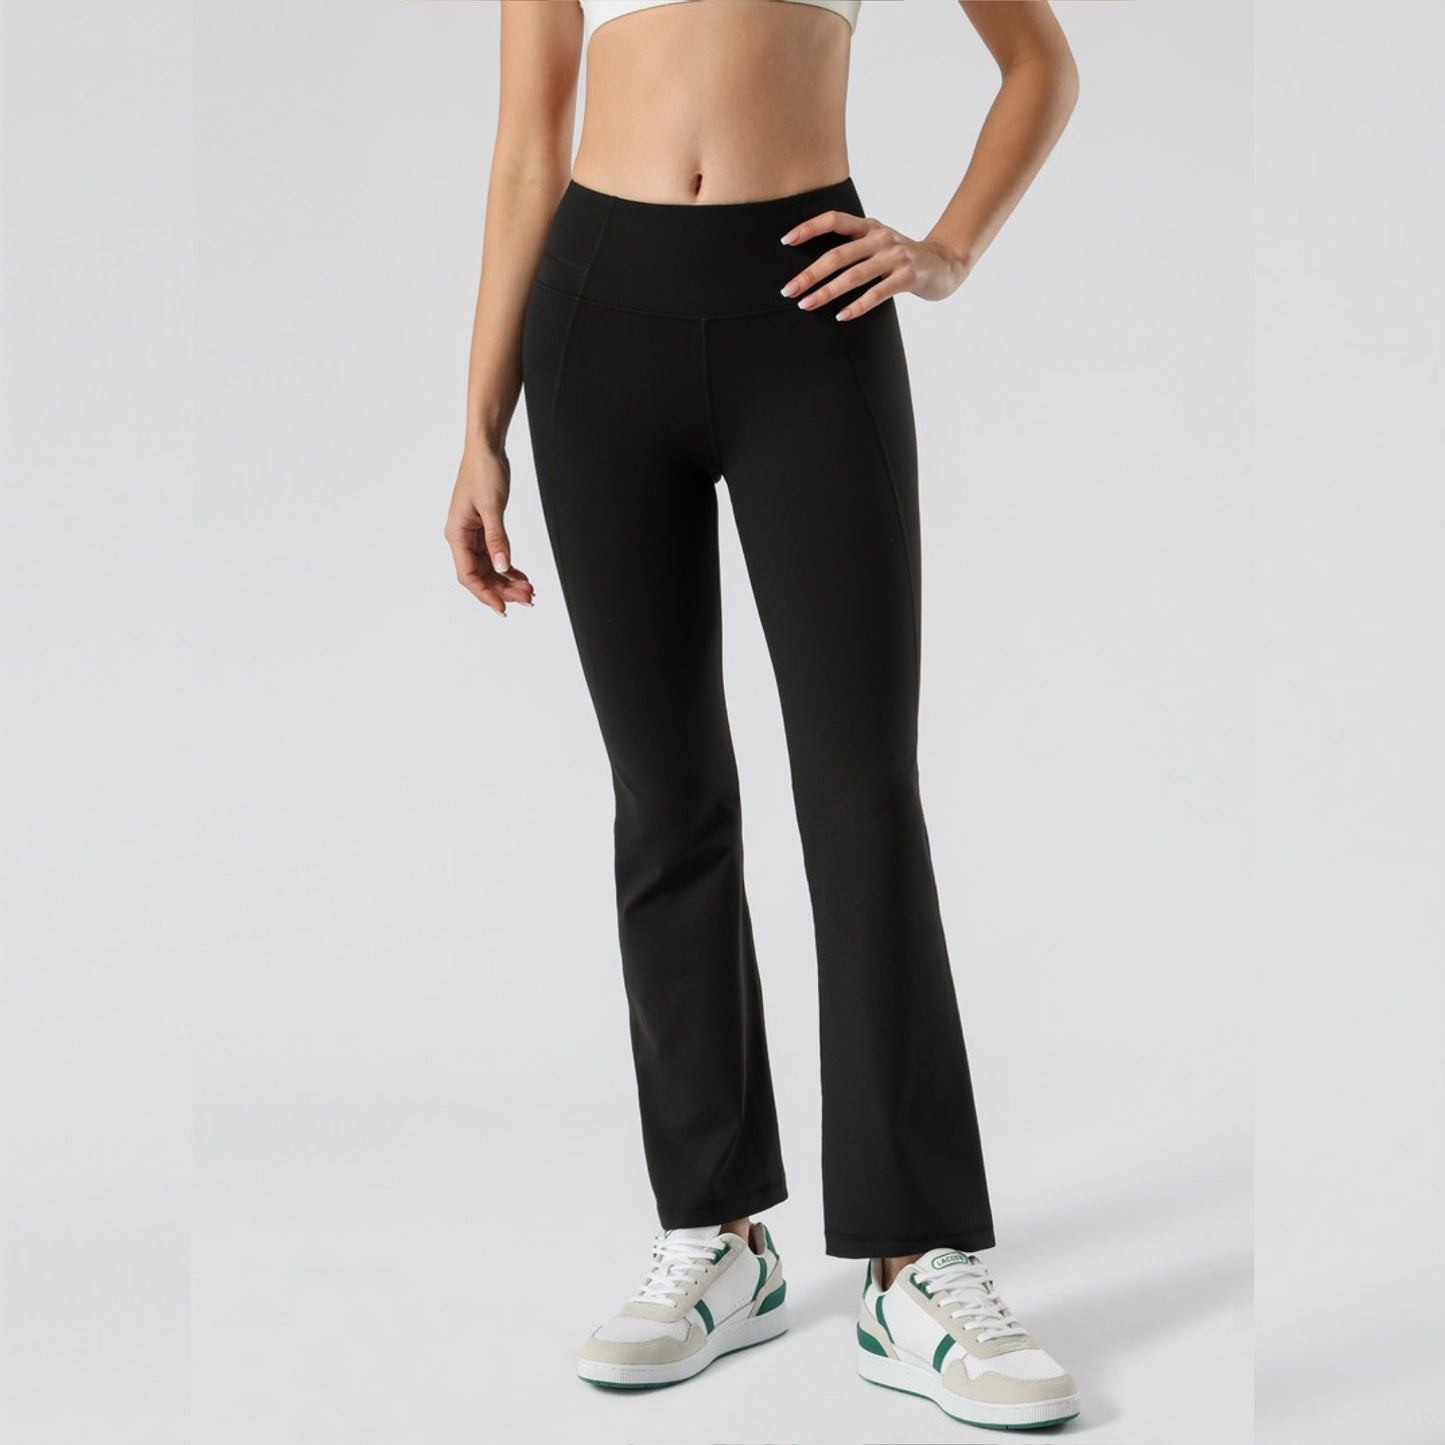 Groove Flare High Rise Pant